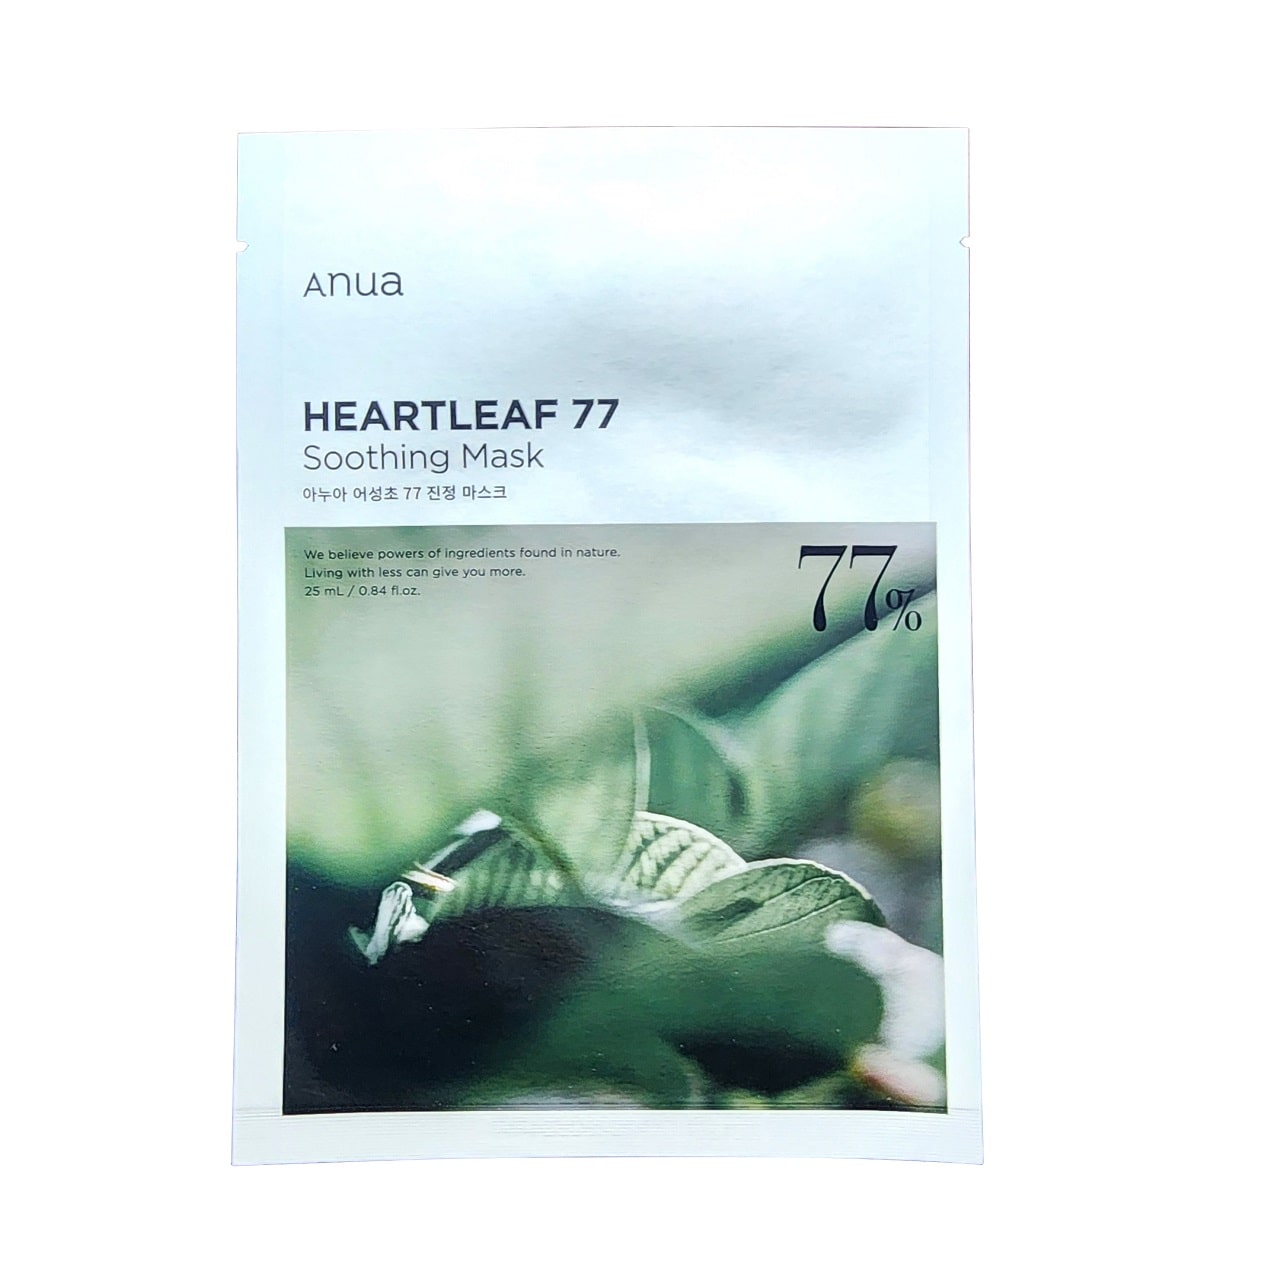 Product label for Anua Heartleaf 77% Soothing Mask (1 sheet)